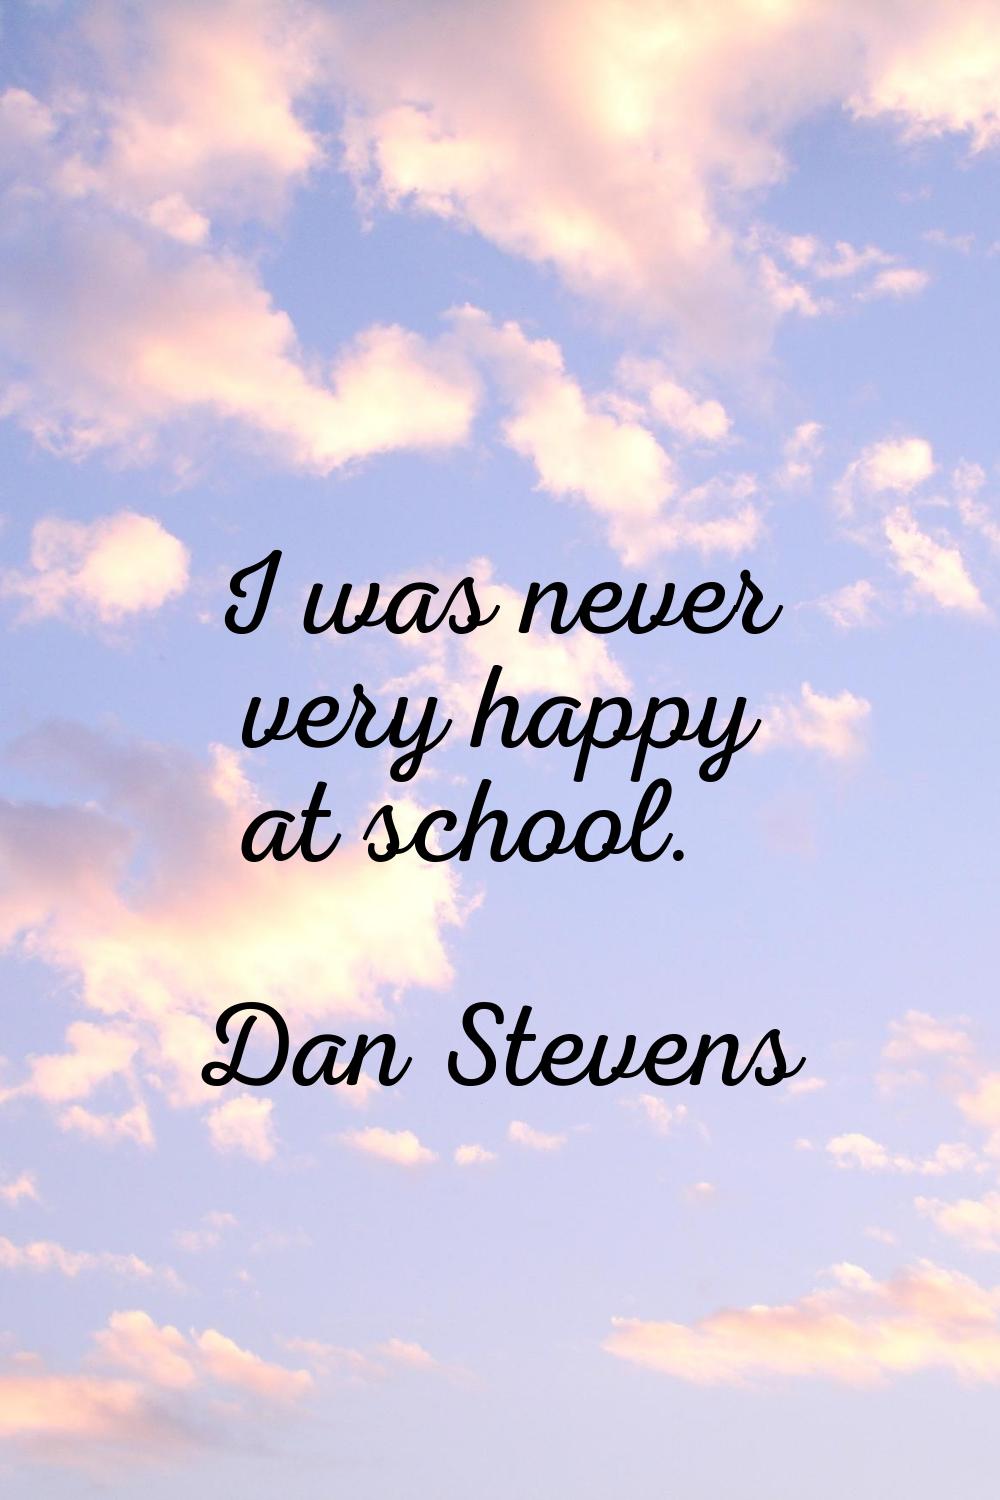 I was never very happy at school.